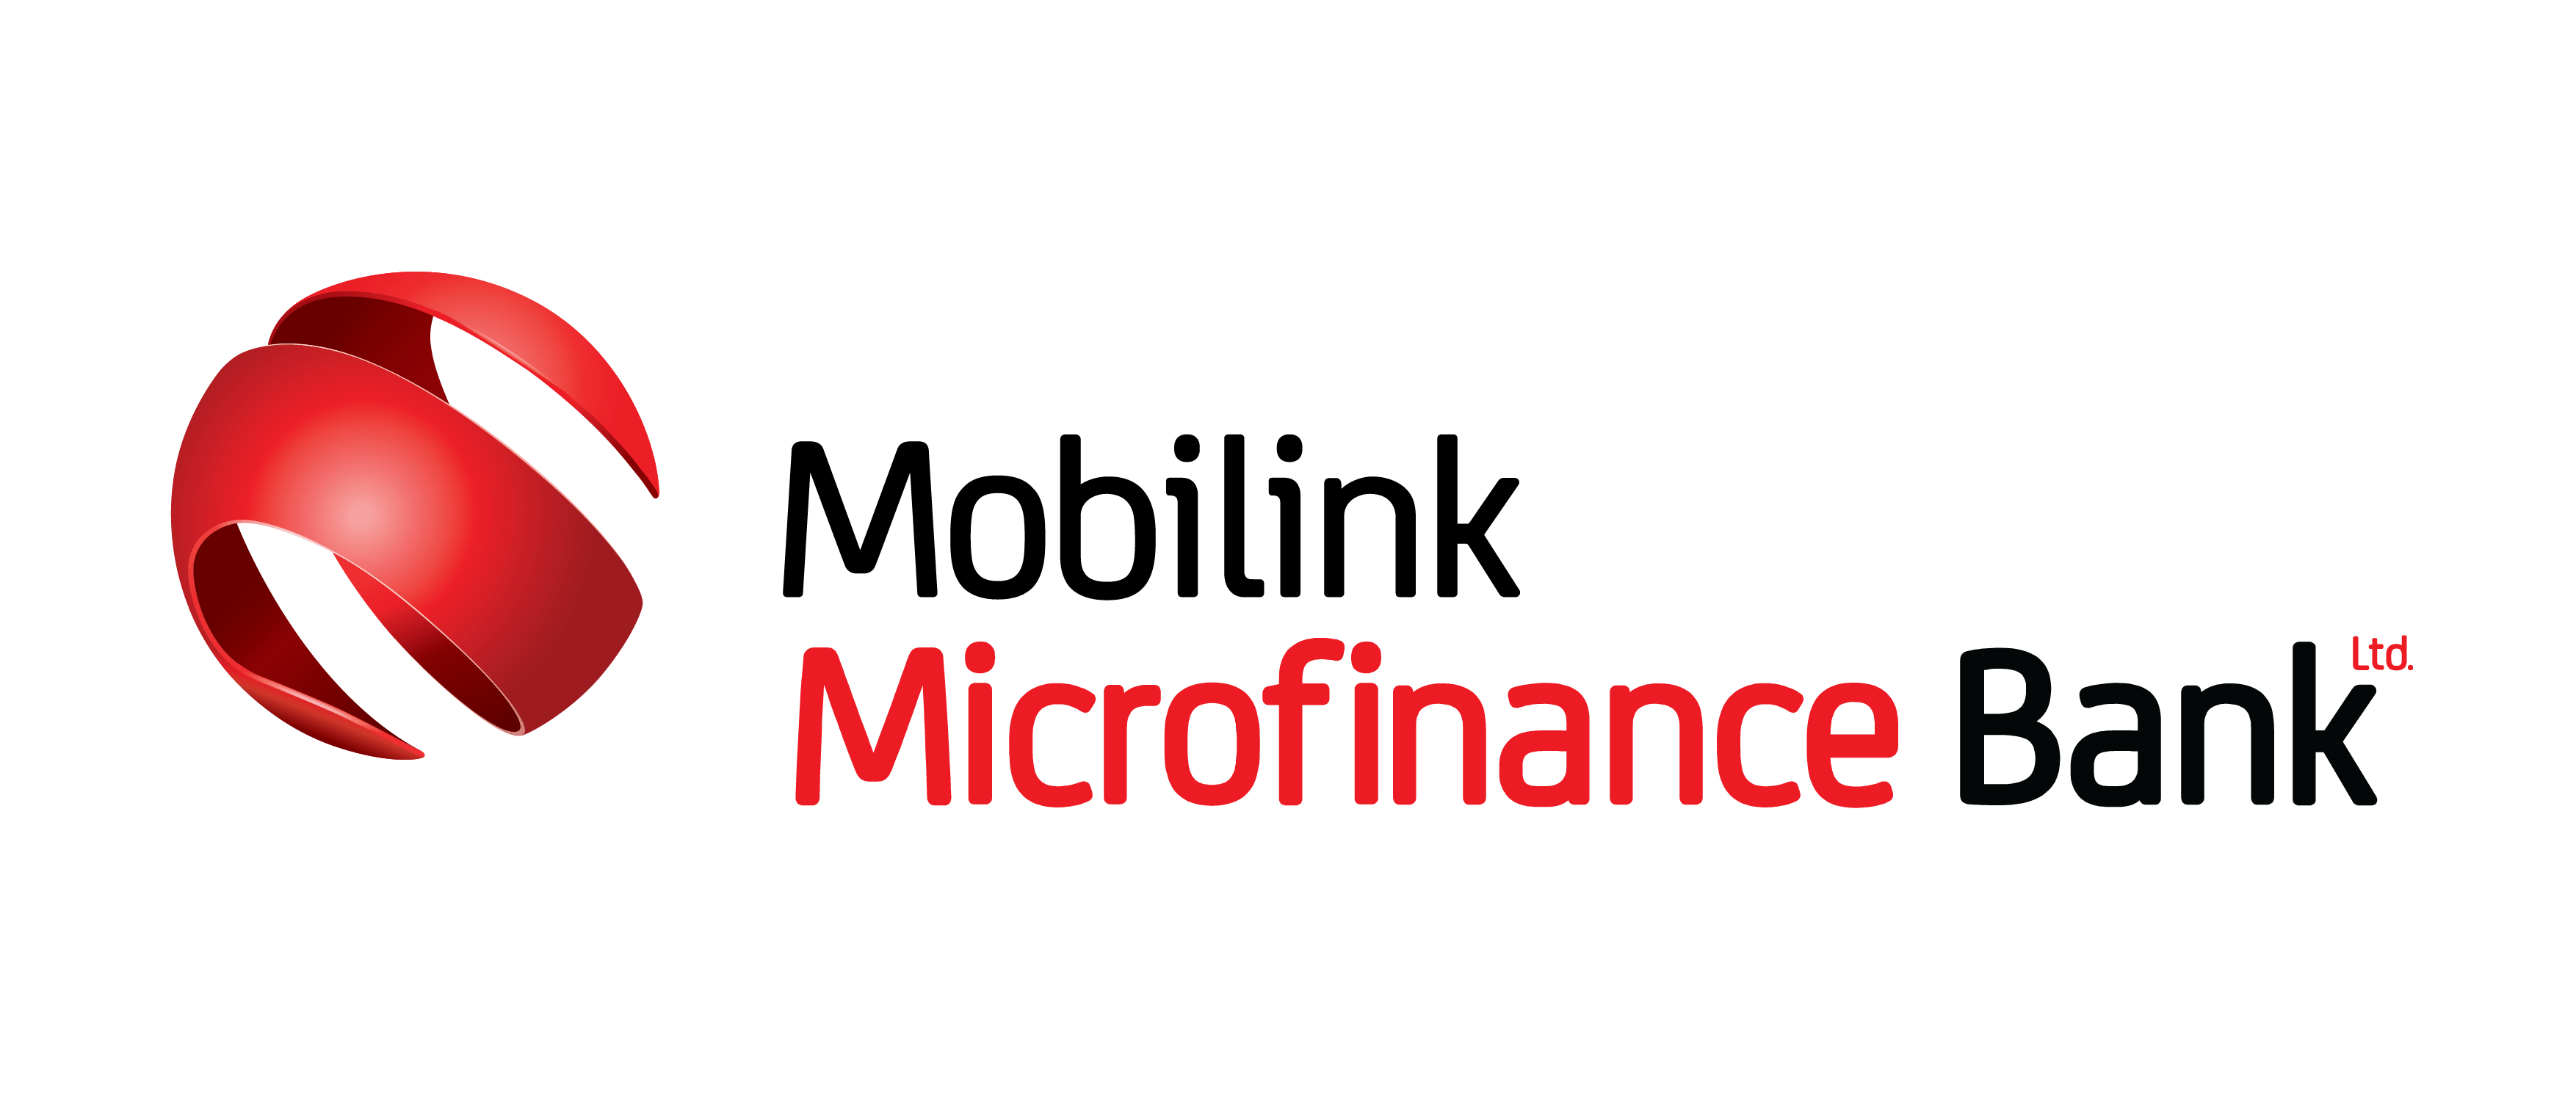 Mobilink Microfinance Bank Posts 98% Year on Year Growth in Revenues to Reinforce Market Position